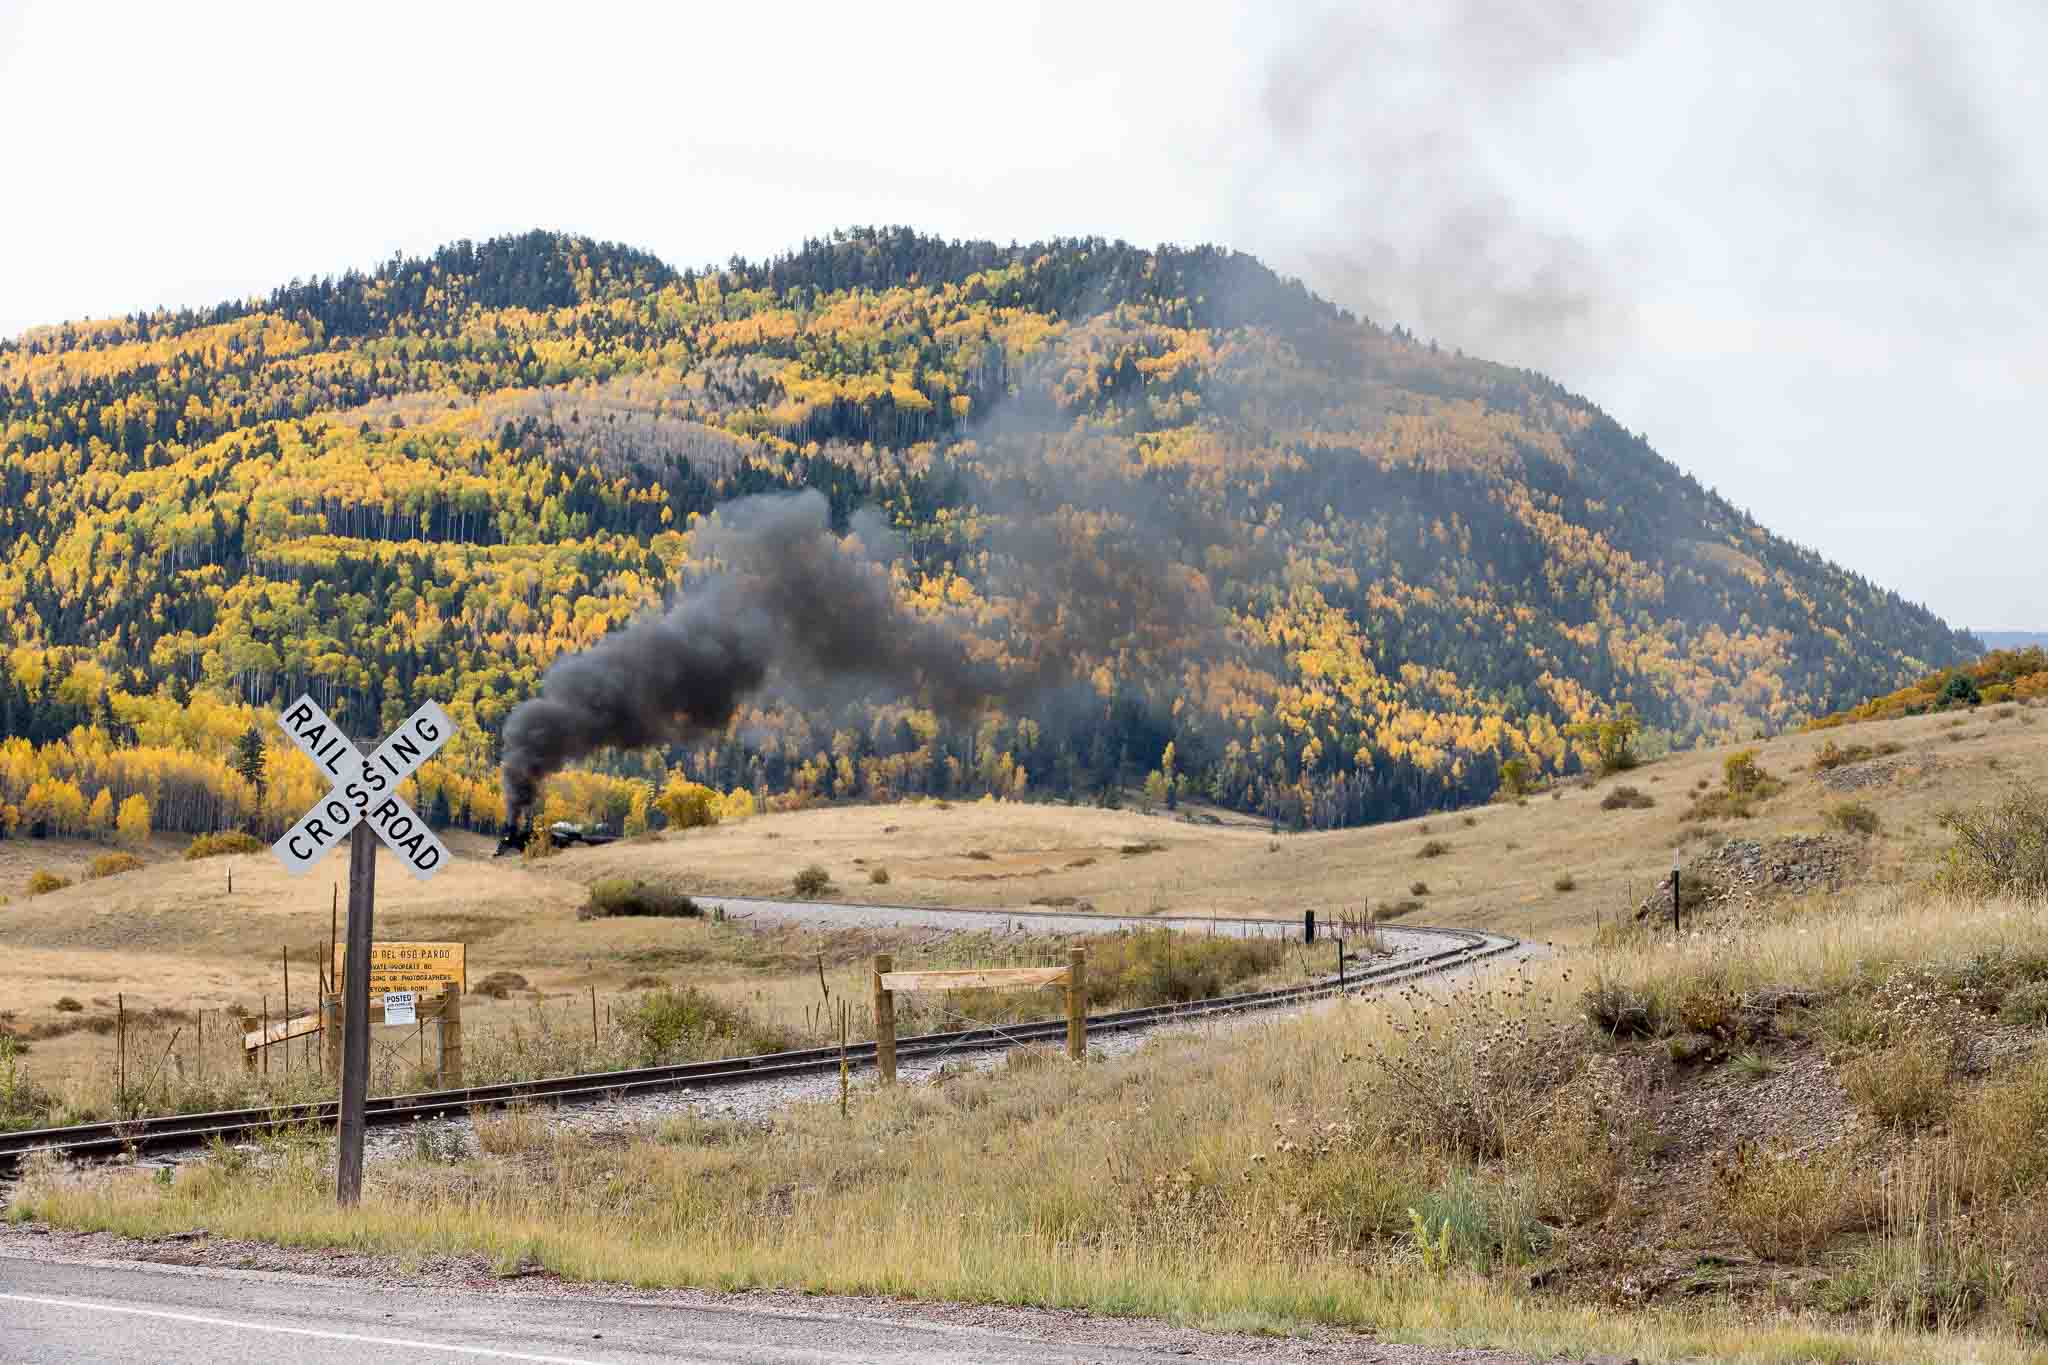 Cumbres & Toltec excursion train approaching a railroad crossing north of Chama NM, October 8, 2014